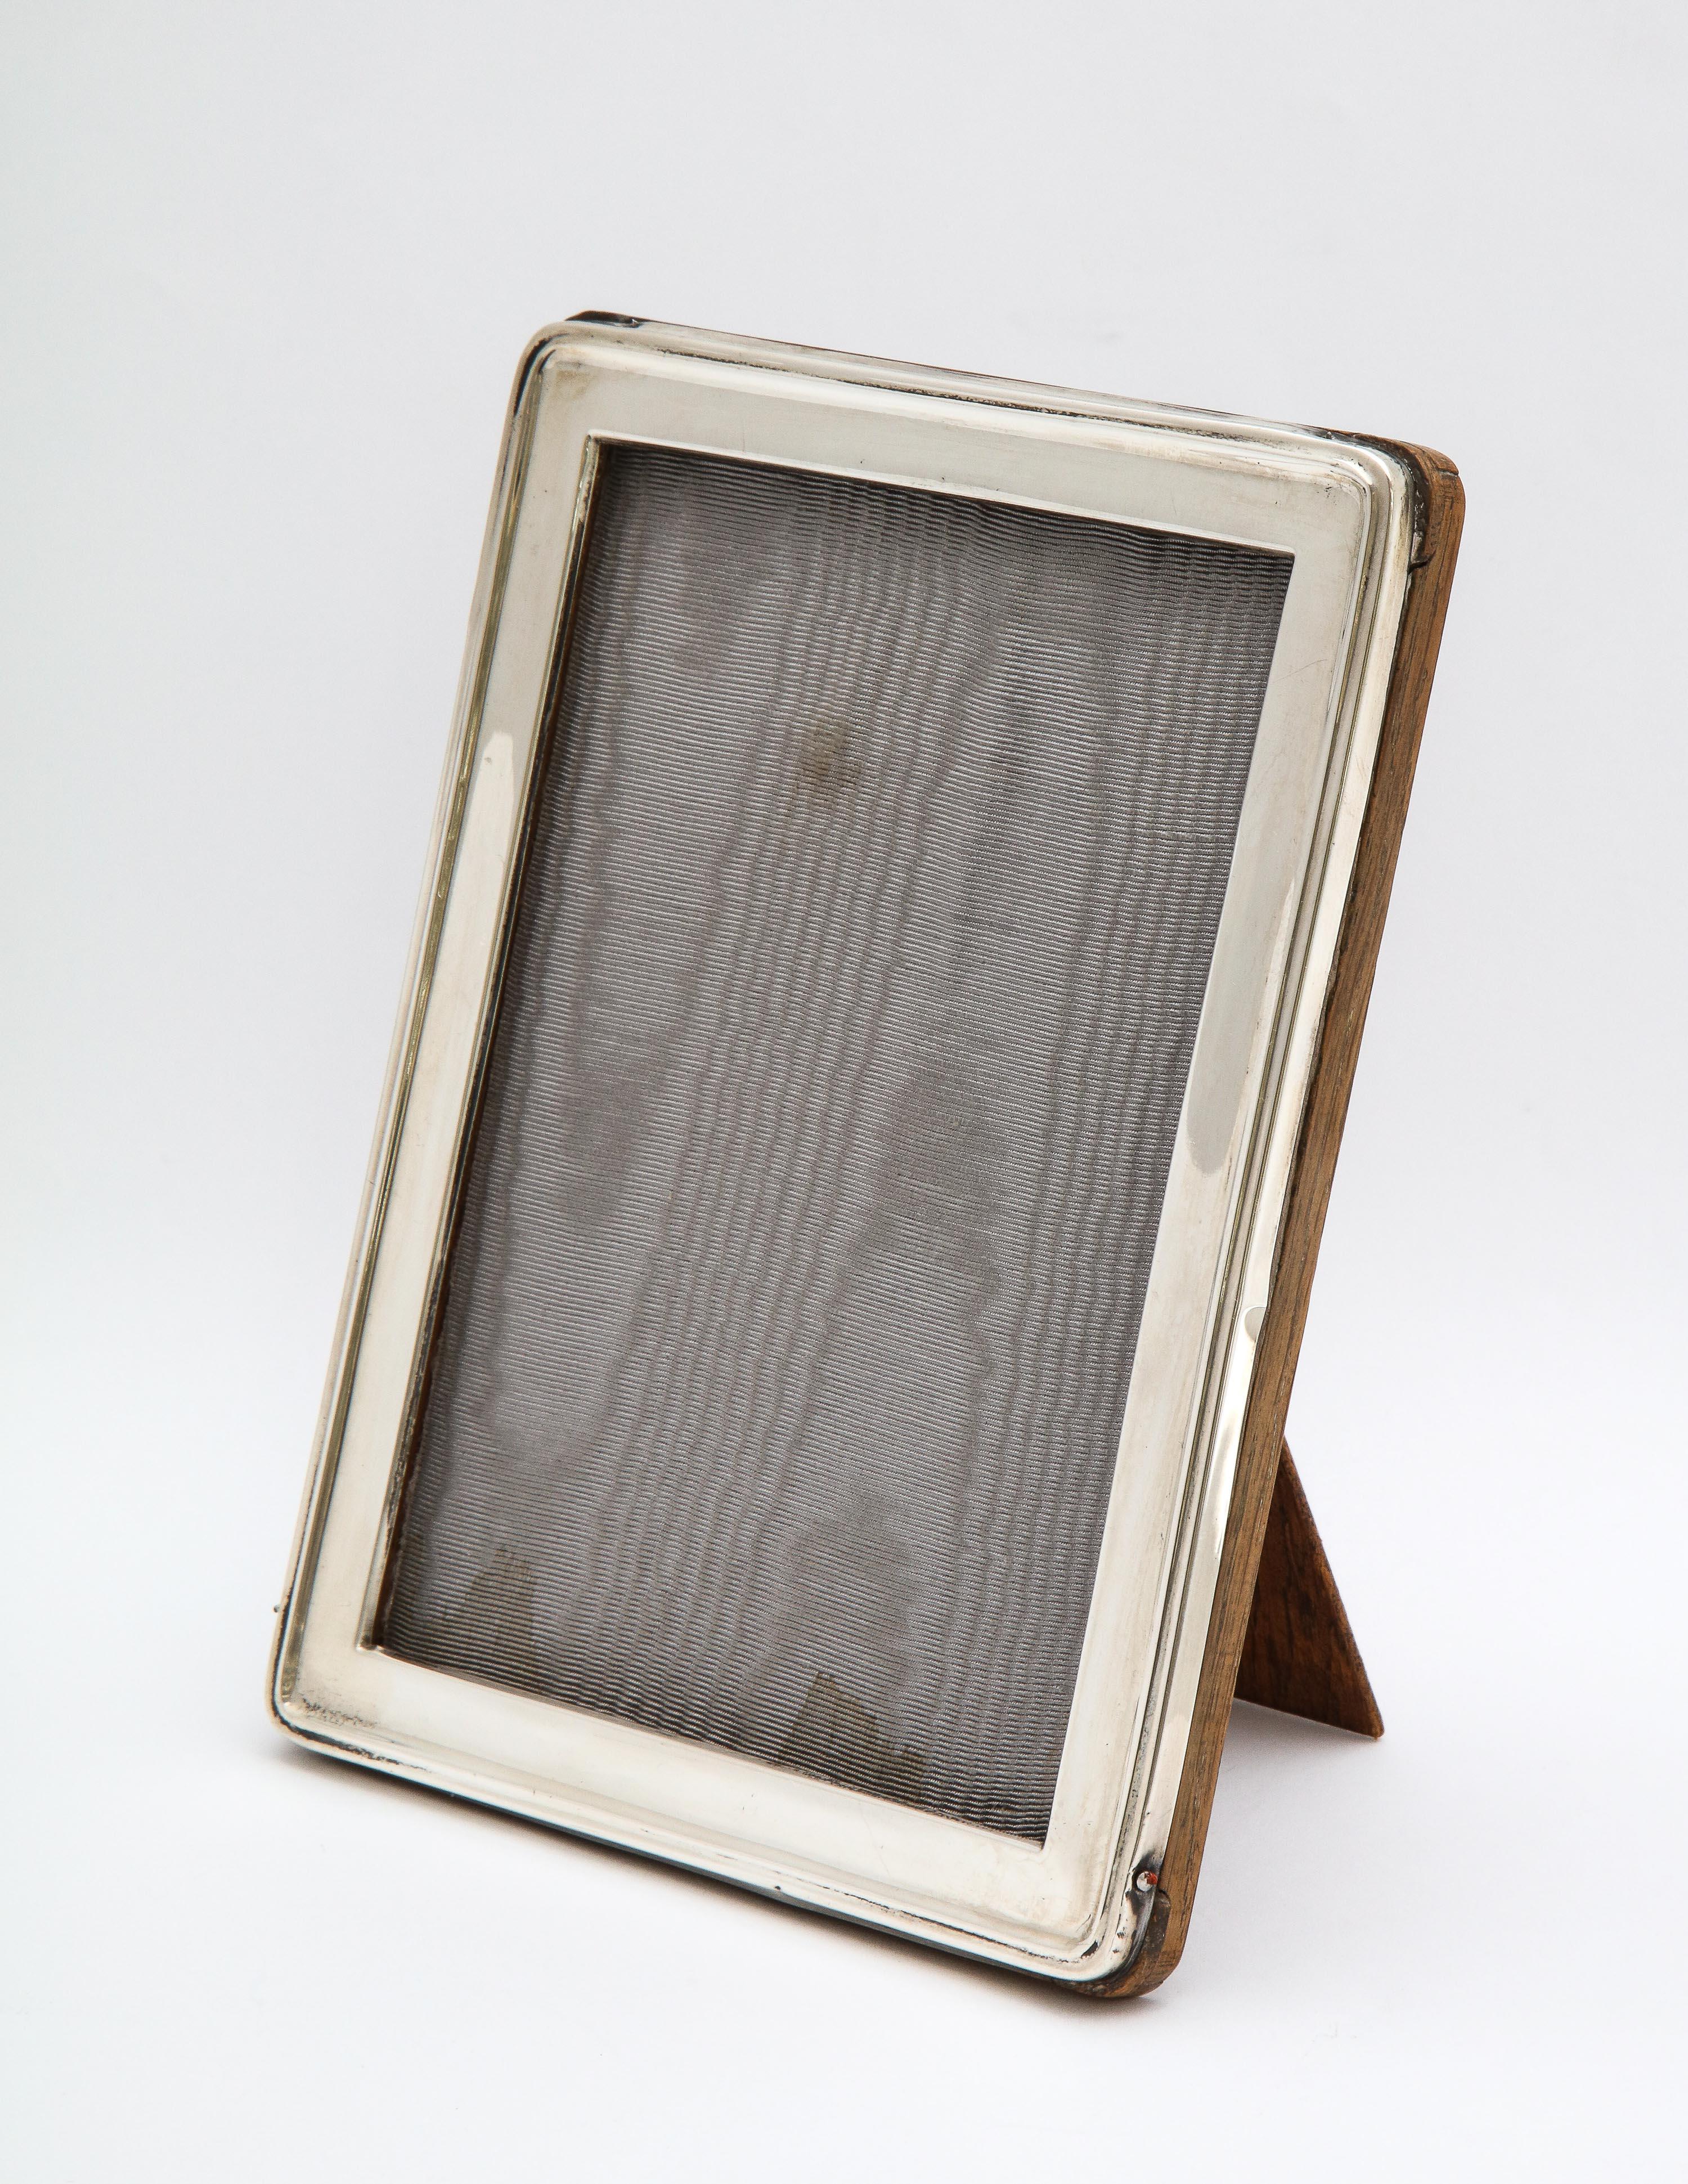 English Art Deco Sterling Silver Picture Frame with Wood Back by Walker & Hall